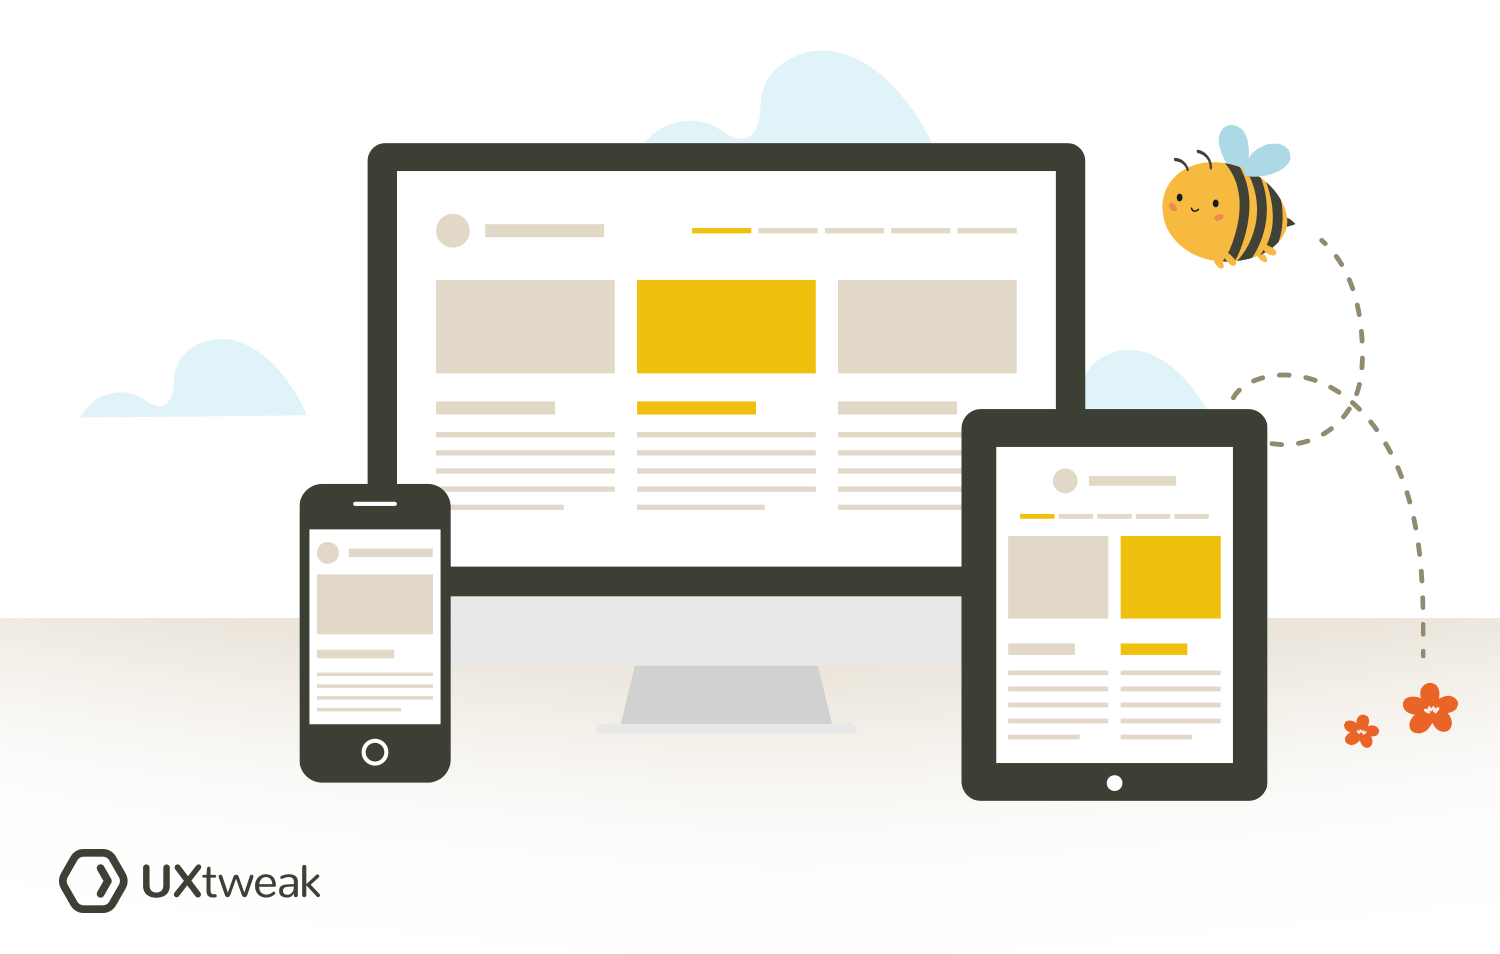 Mockups in UX: Definition and Best Practices